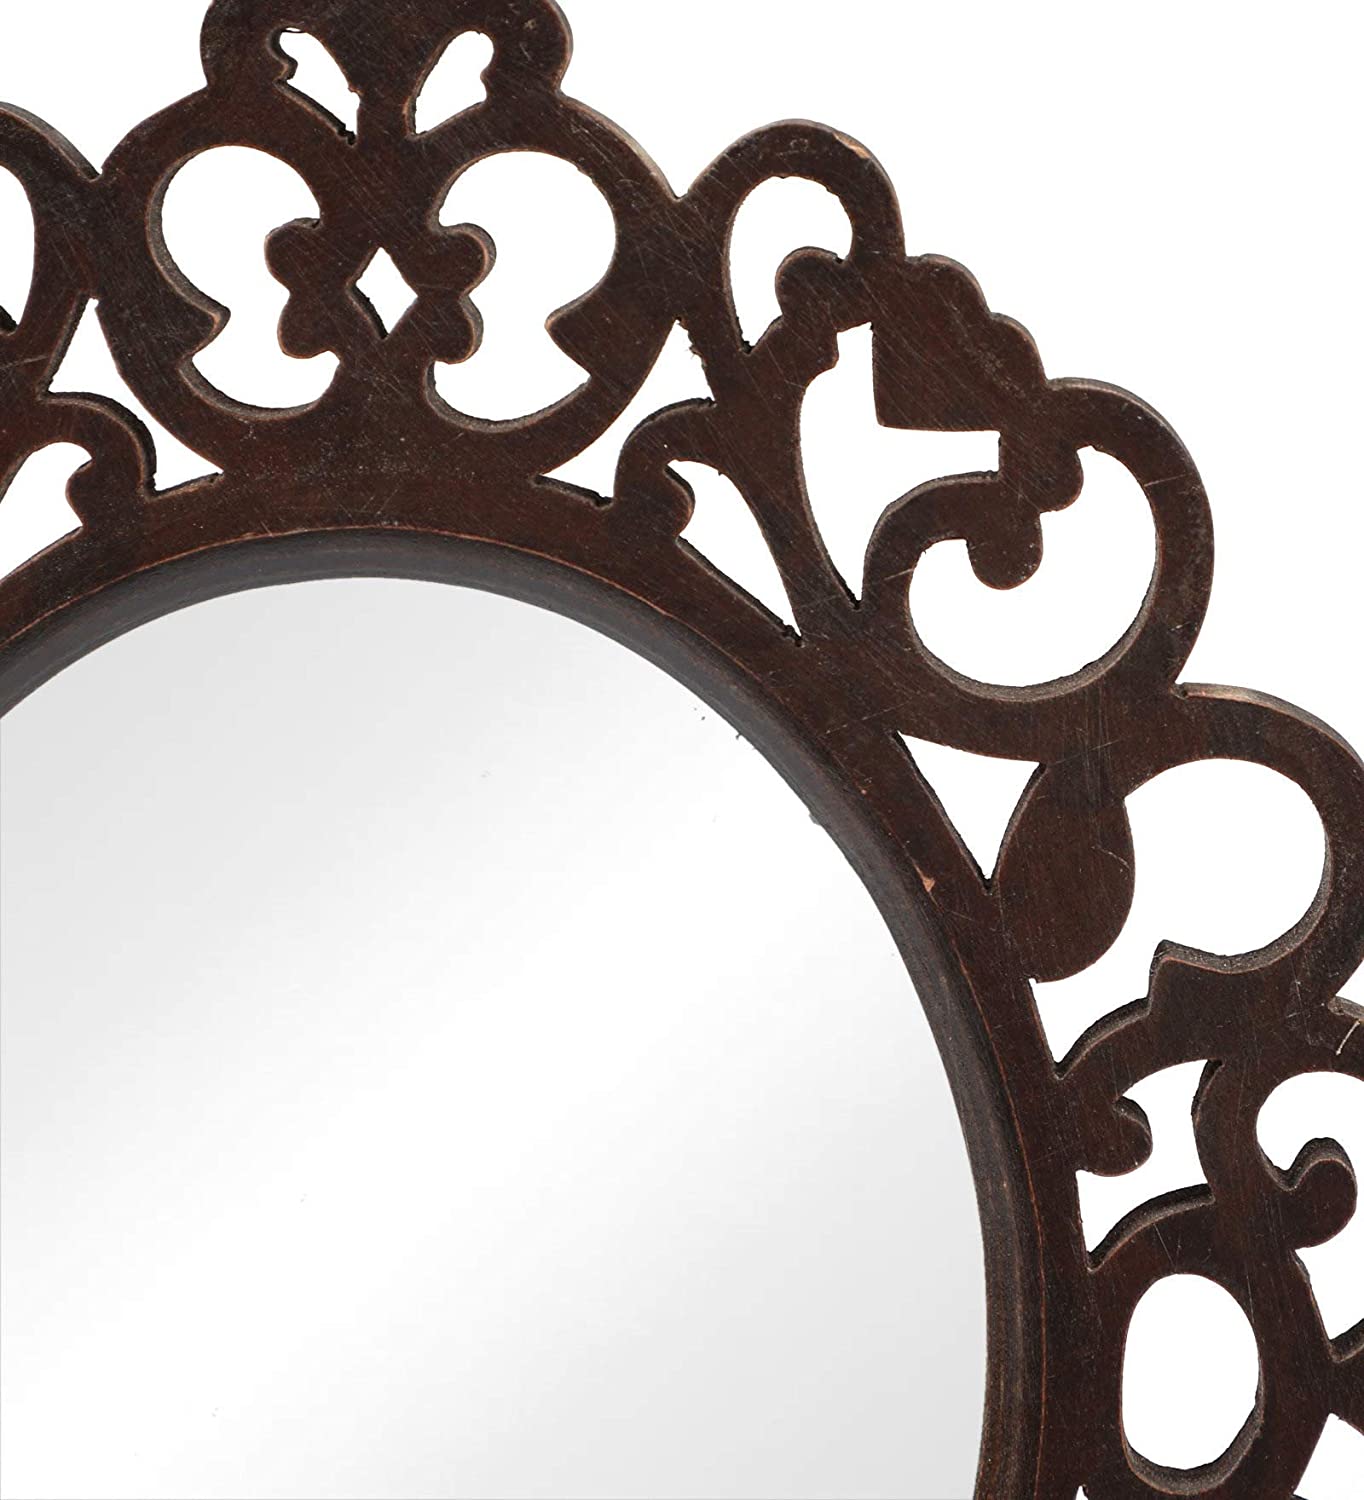 Engineered Wood Oval Decorative Wall Mount Mirror (18 x 14 inch, Brown), Model: TUS-MR-47, Framed